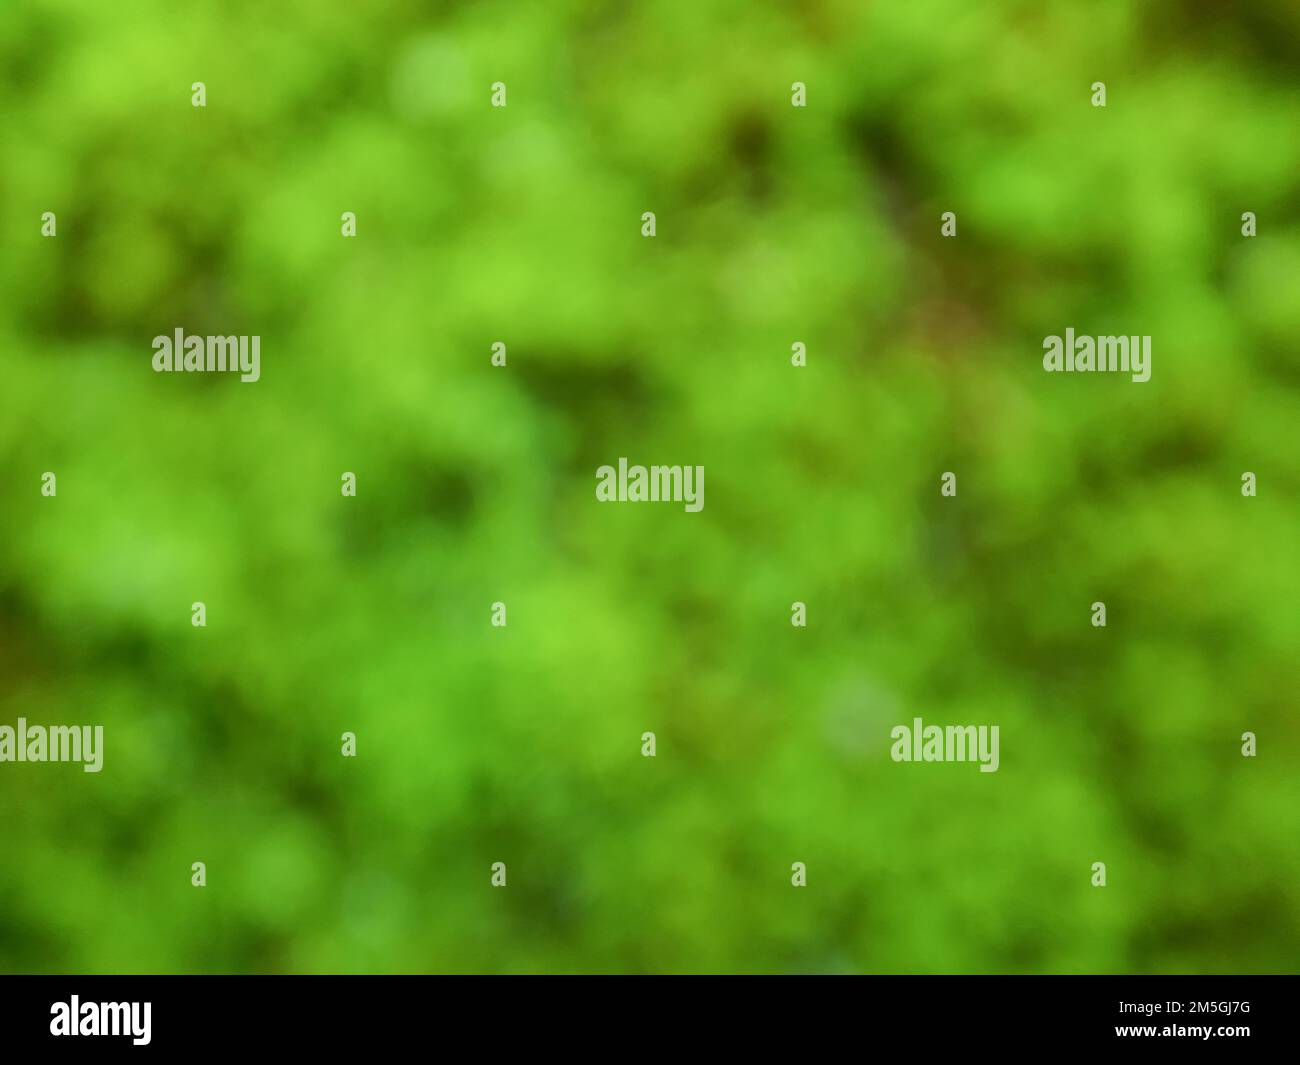 Close up. Blur photo or defocused background of green nature. Wallpaper or backgrounds Stock Photo